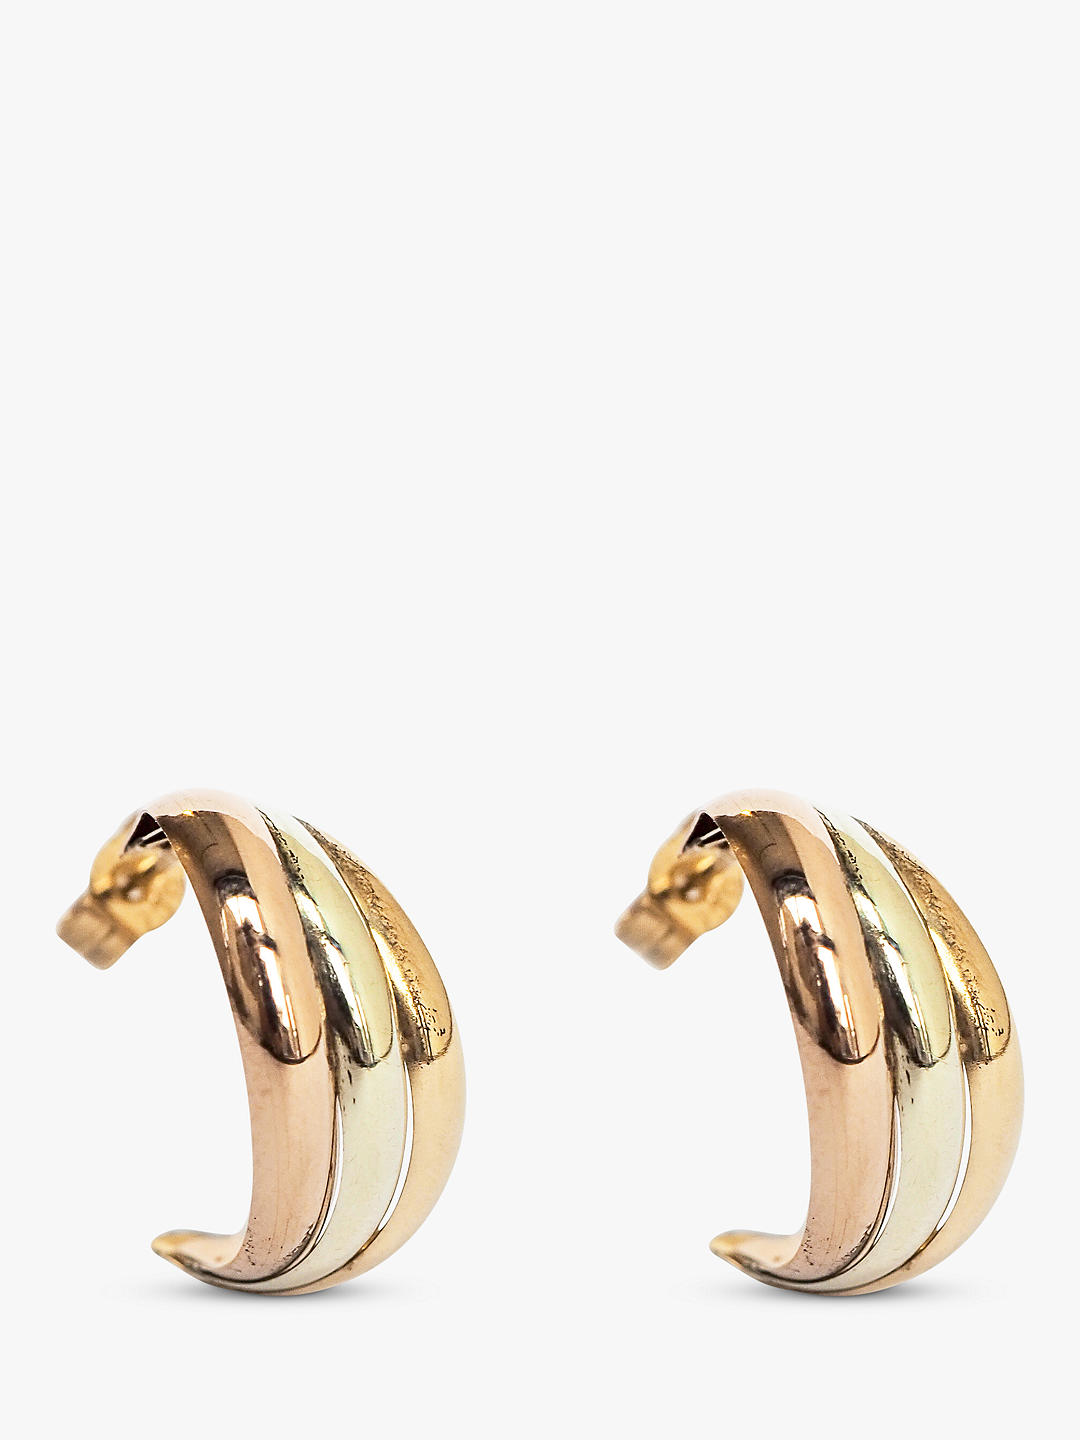 L & T Heirlooms Second Hand 9ct Tri-Colour Gold Demi-Hoop Earrings